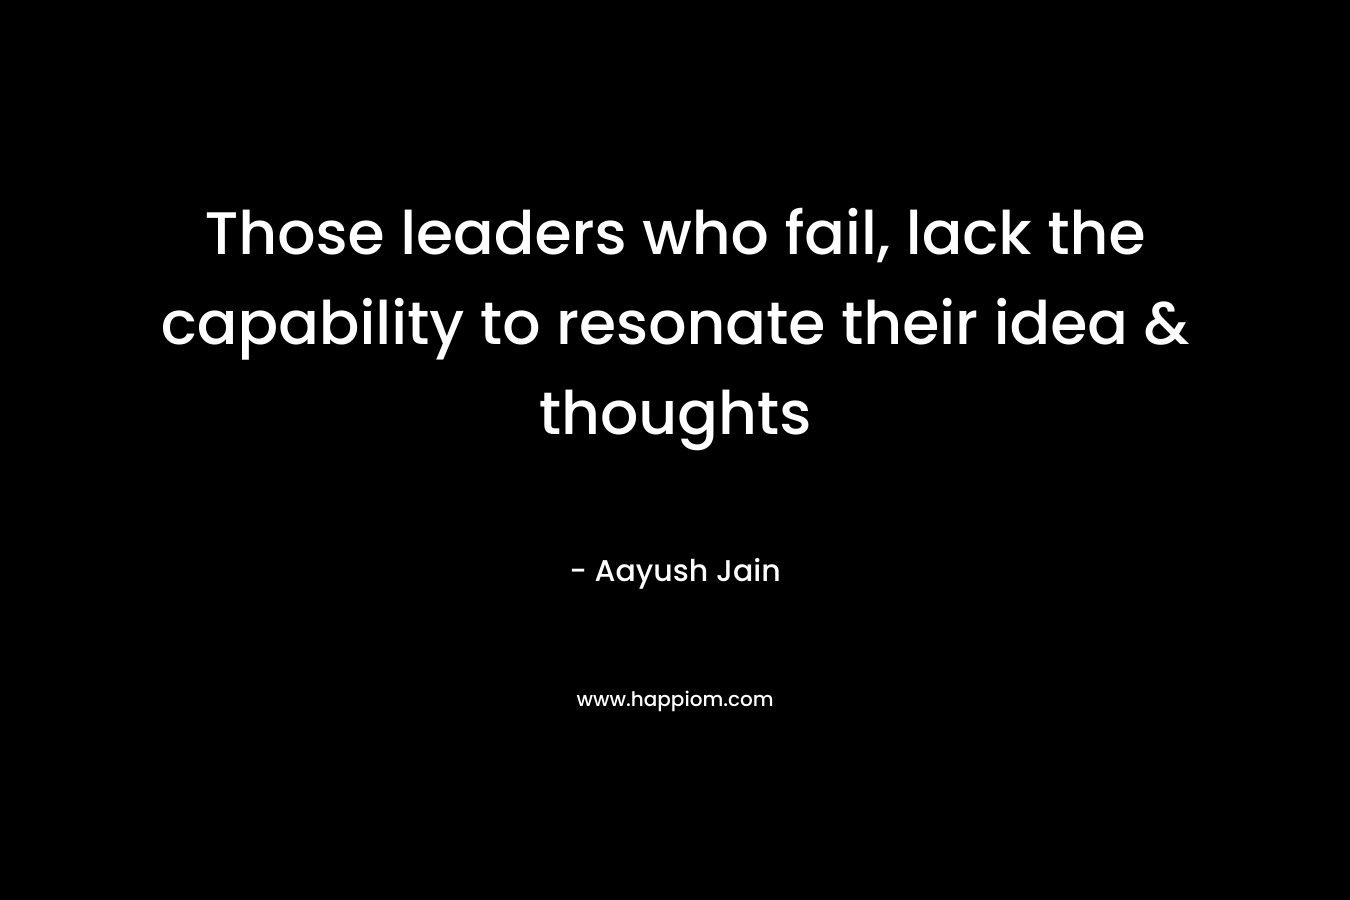 Those leaders who fail, lack the capability to resonate their idea & thoughts – Aayush Jain